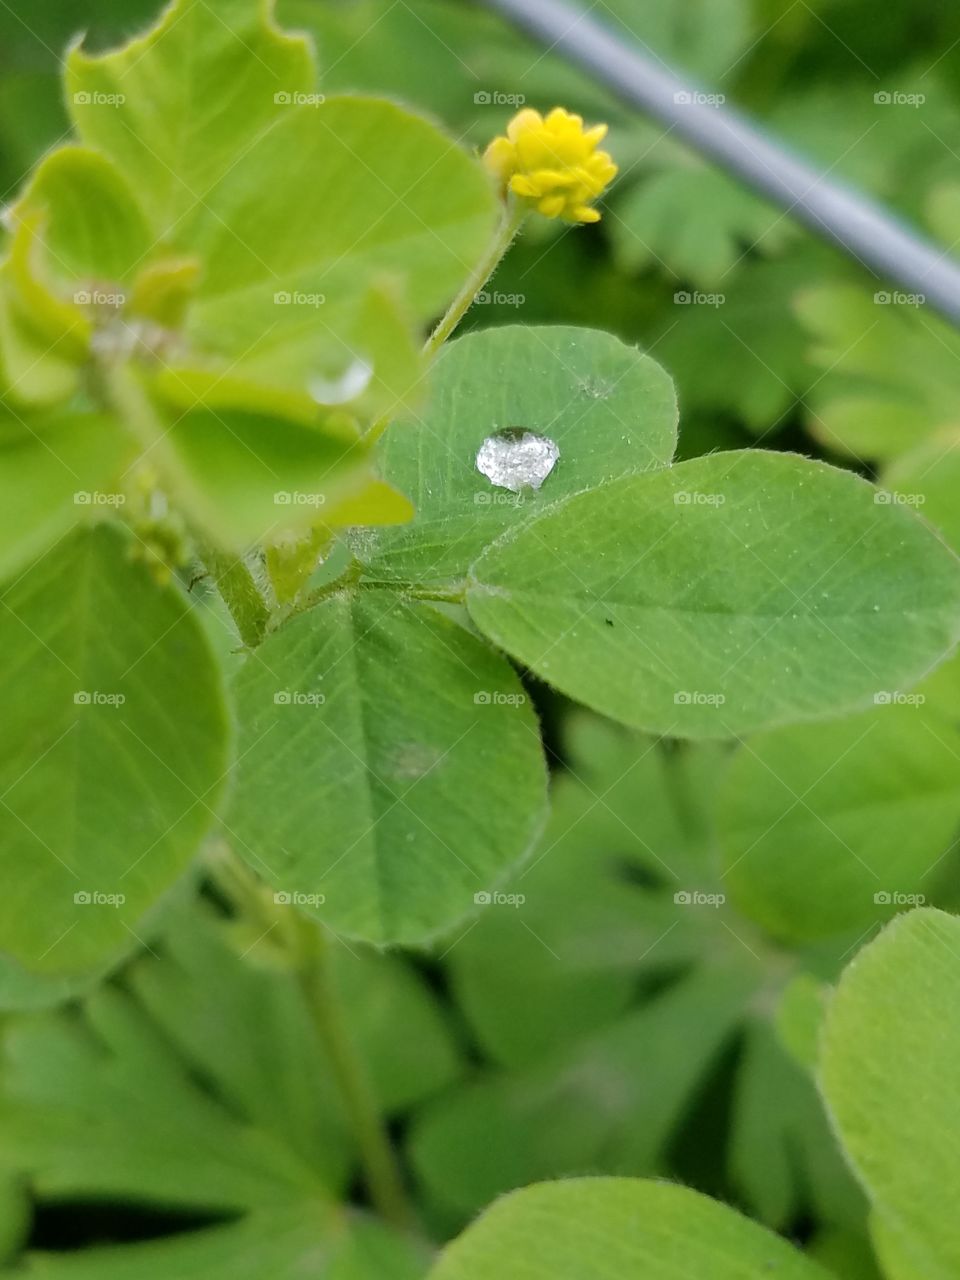 drop of water on clover